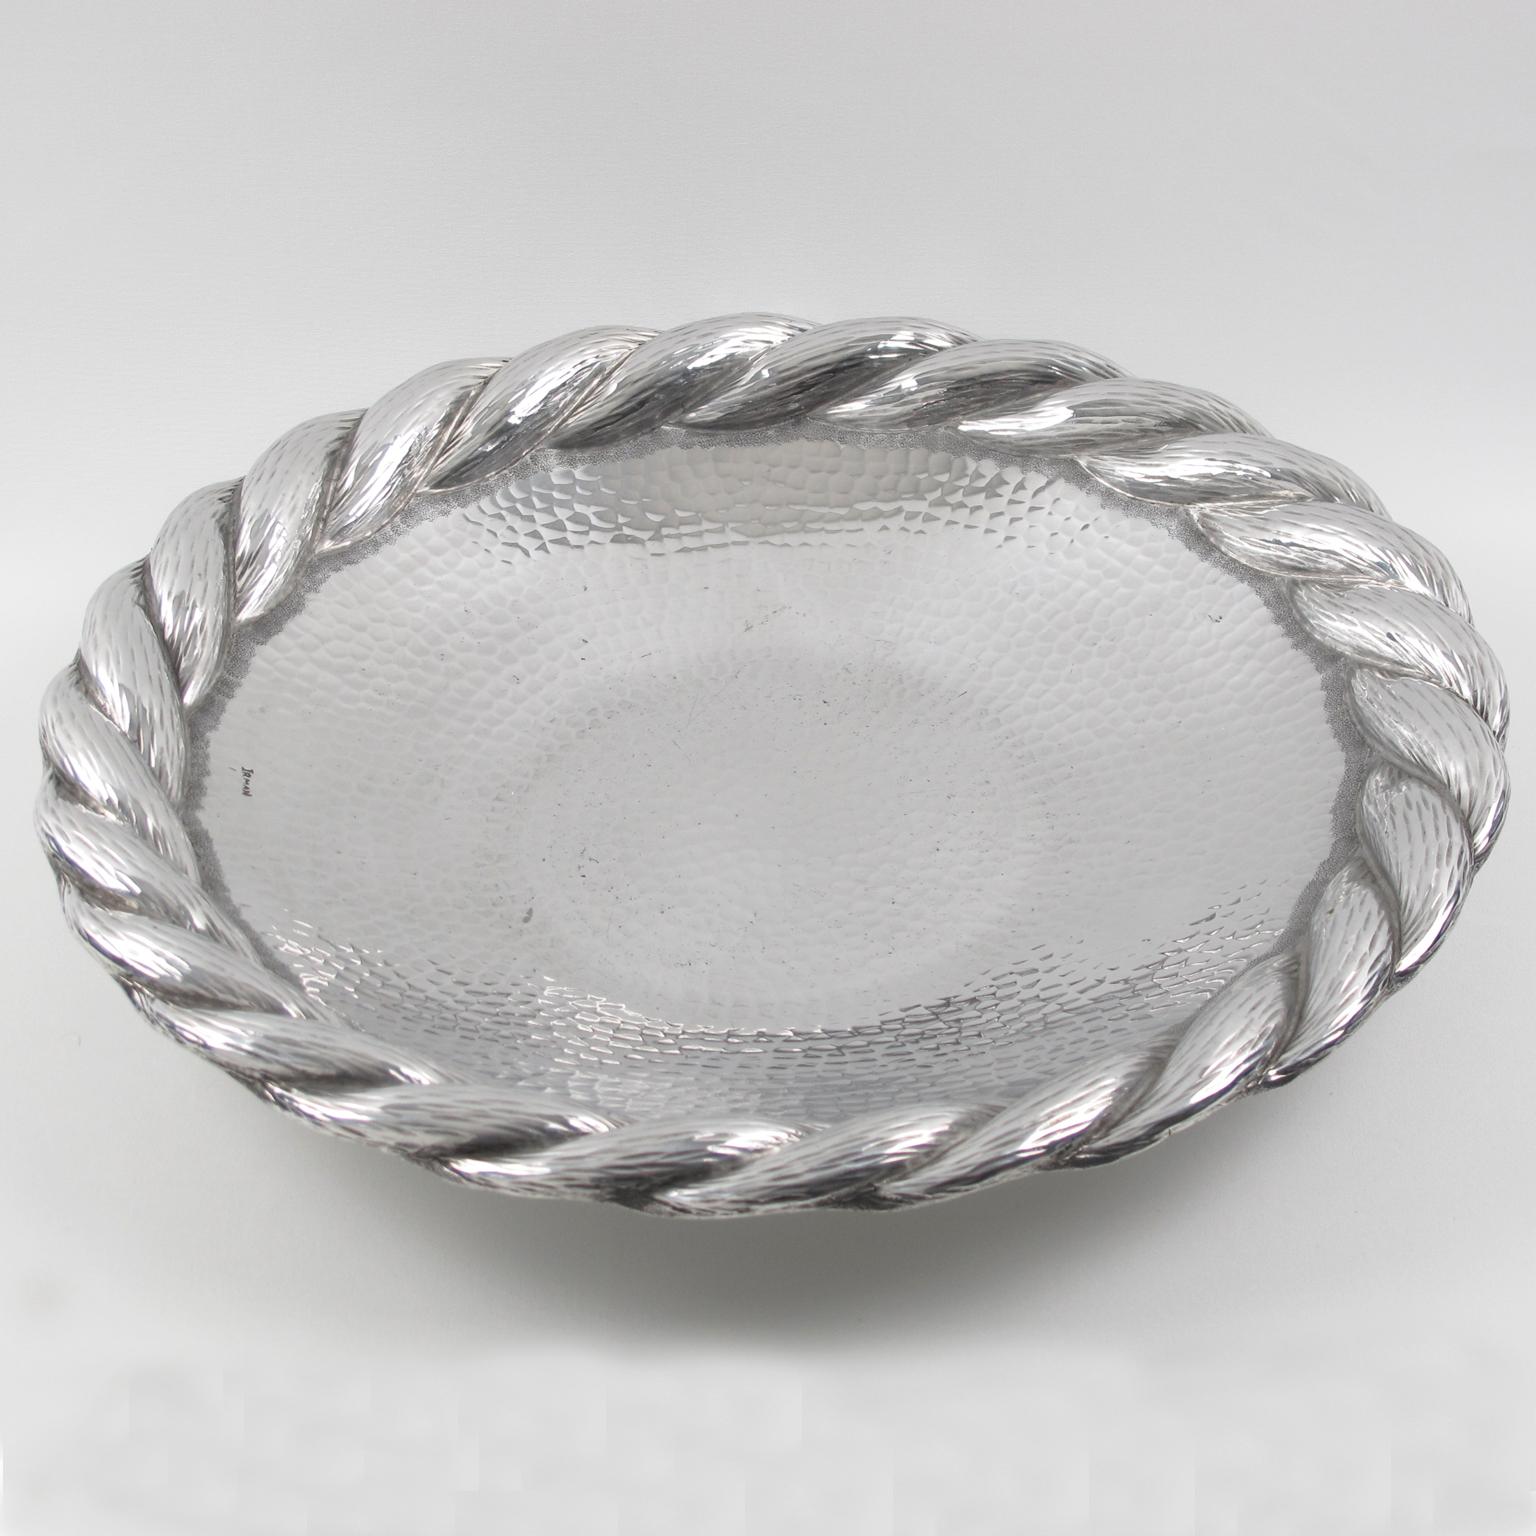 This elegant large platter, serving tray, or centerpiece in polished aluminum was designed and crafted by Irman, France, in the 1930s. This is a perfect barware accessory or decorative centerpiece. The design boasts a hammered textured pattern with